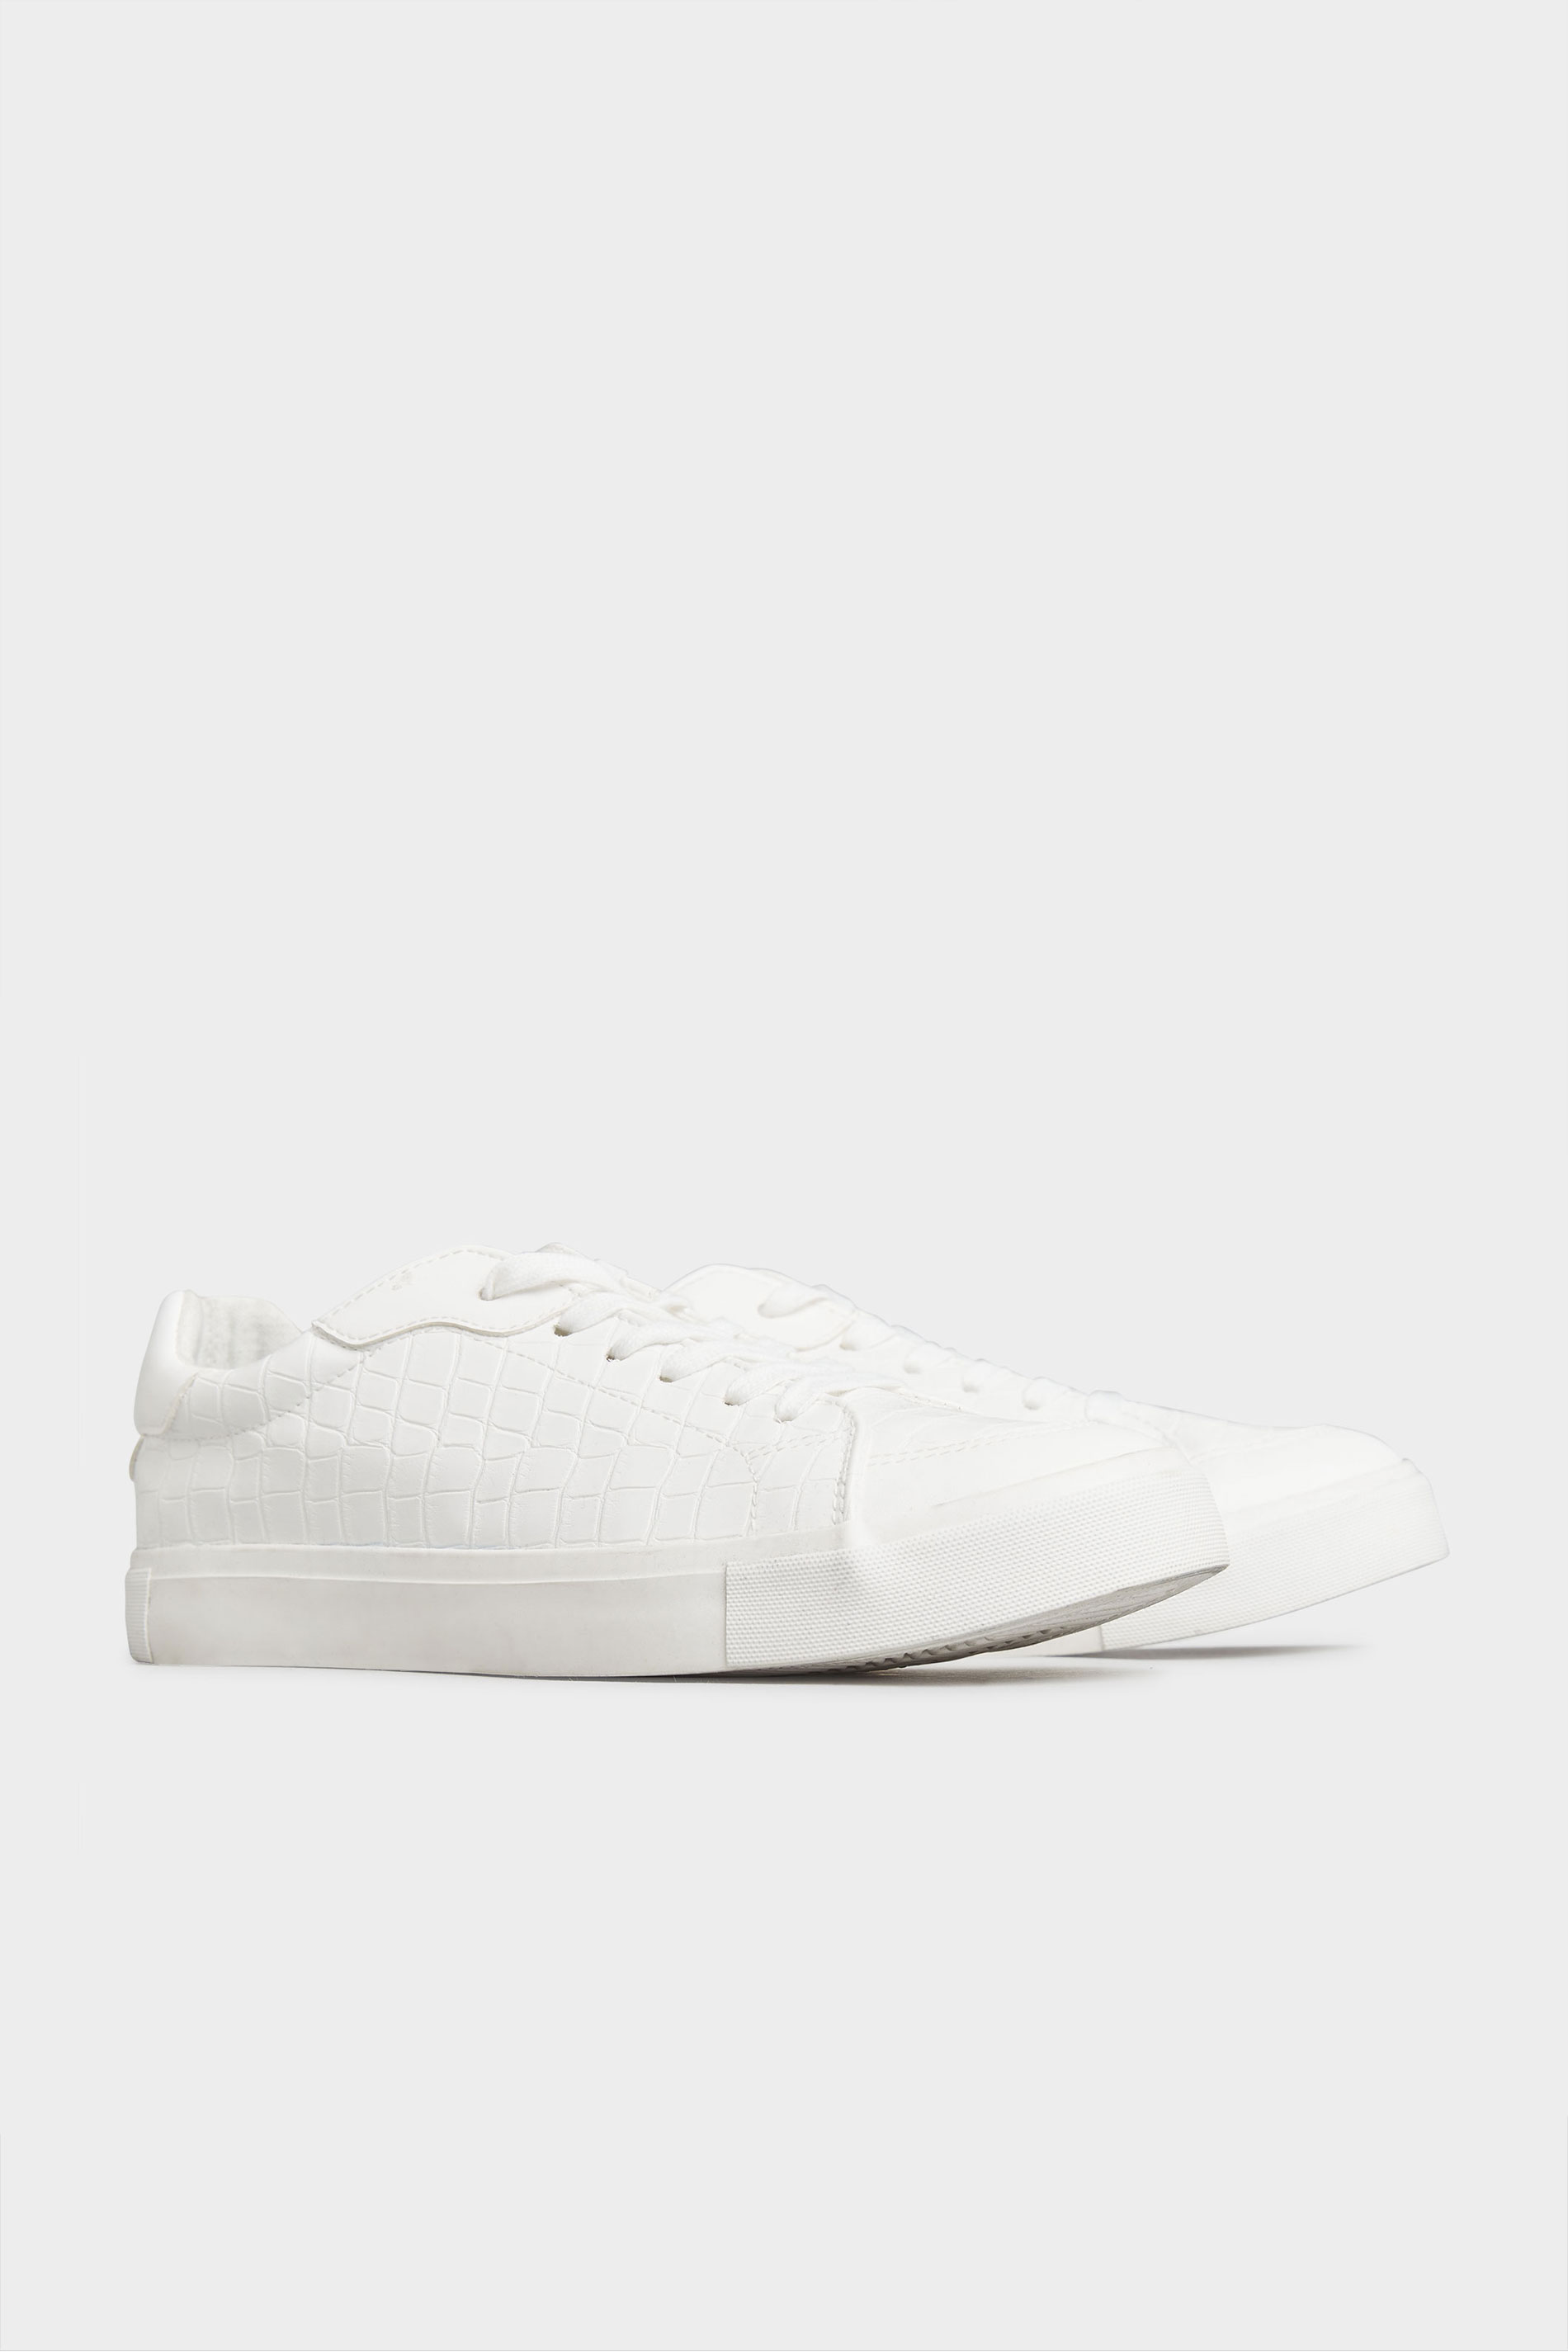 LTS White Croc Lace Up Trainers_B.jpg